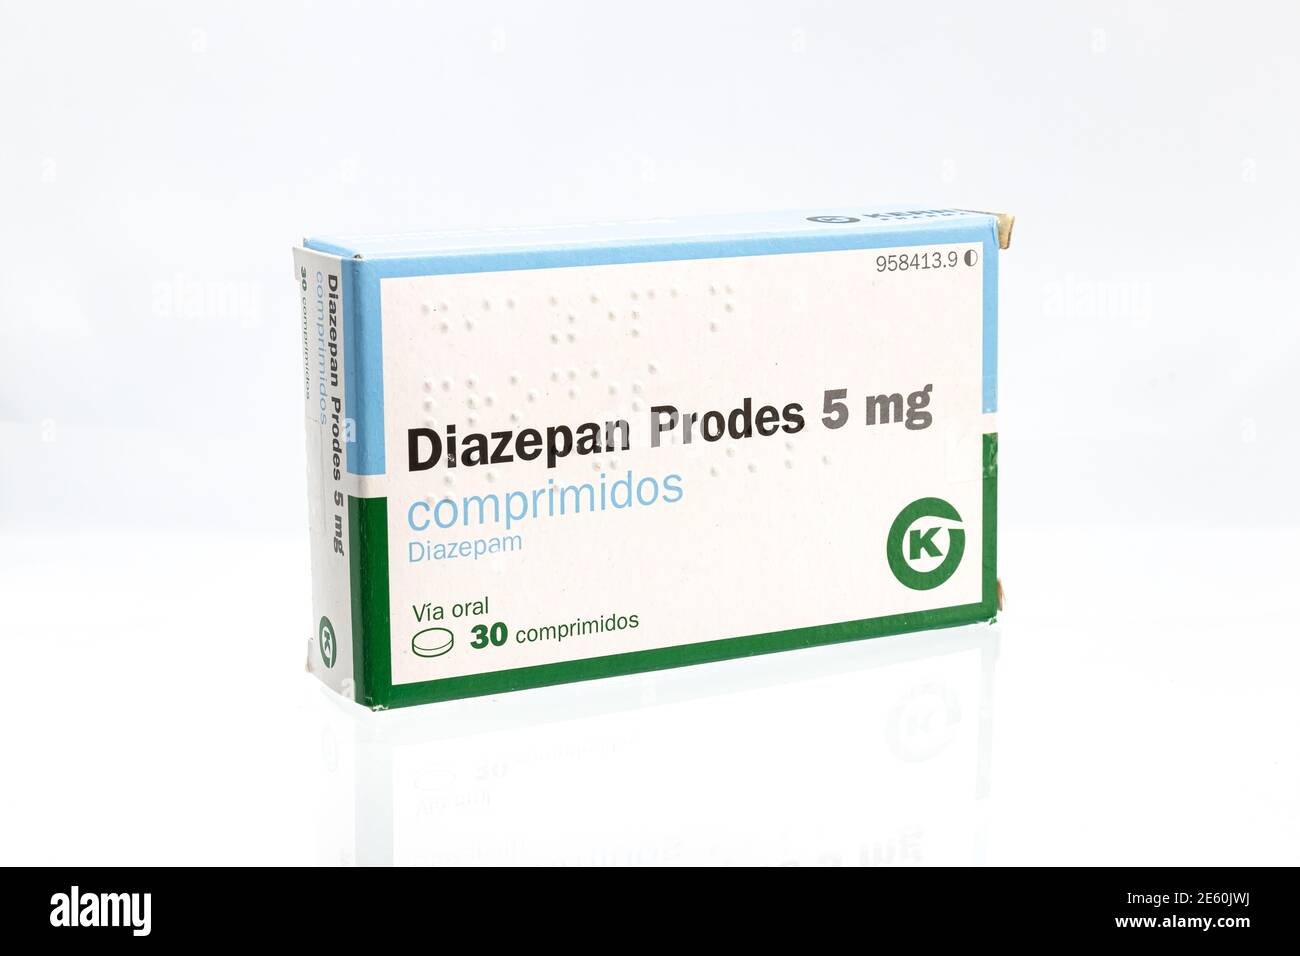 Huelva, Spain - January 25, 2021: Spanish Box of Diazepam brand Prodes. Diazepam, first marketed as Valium, is a medicine of the benzodiazepine family Stock Photo